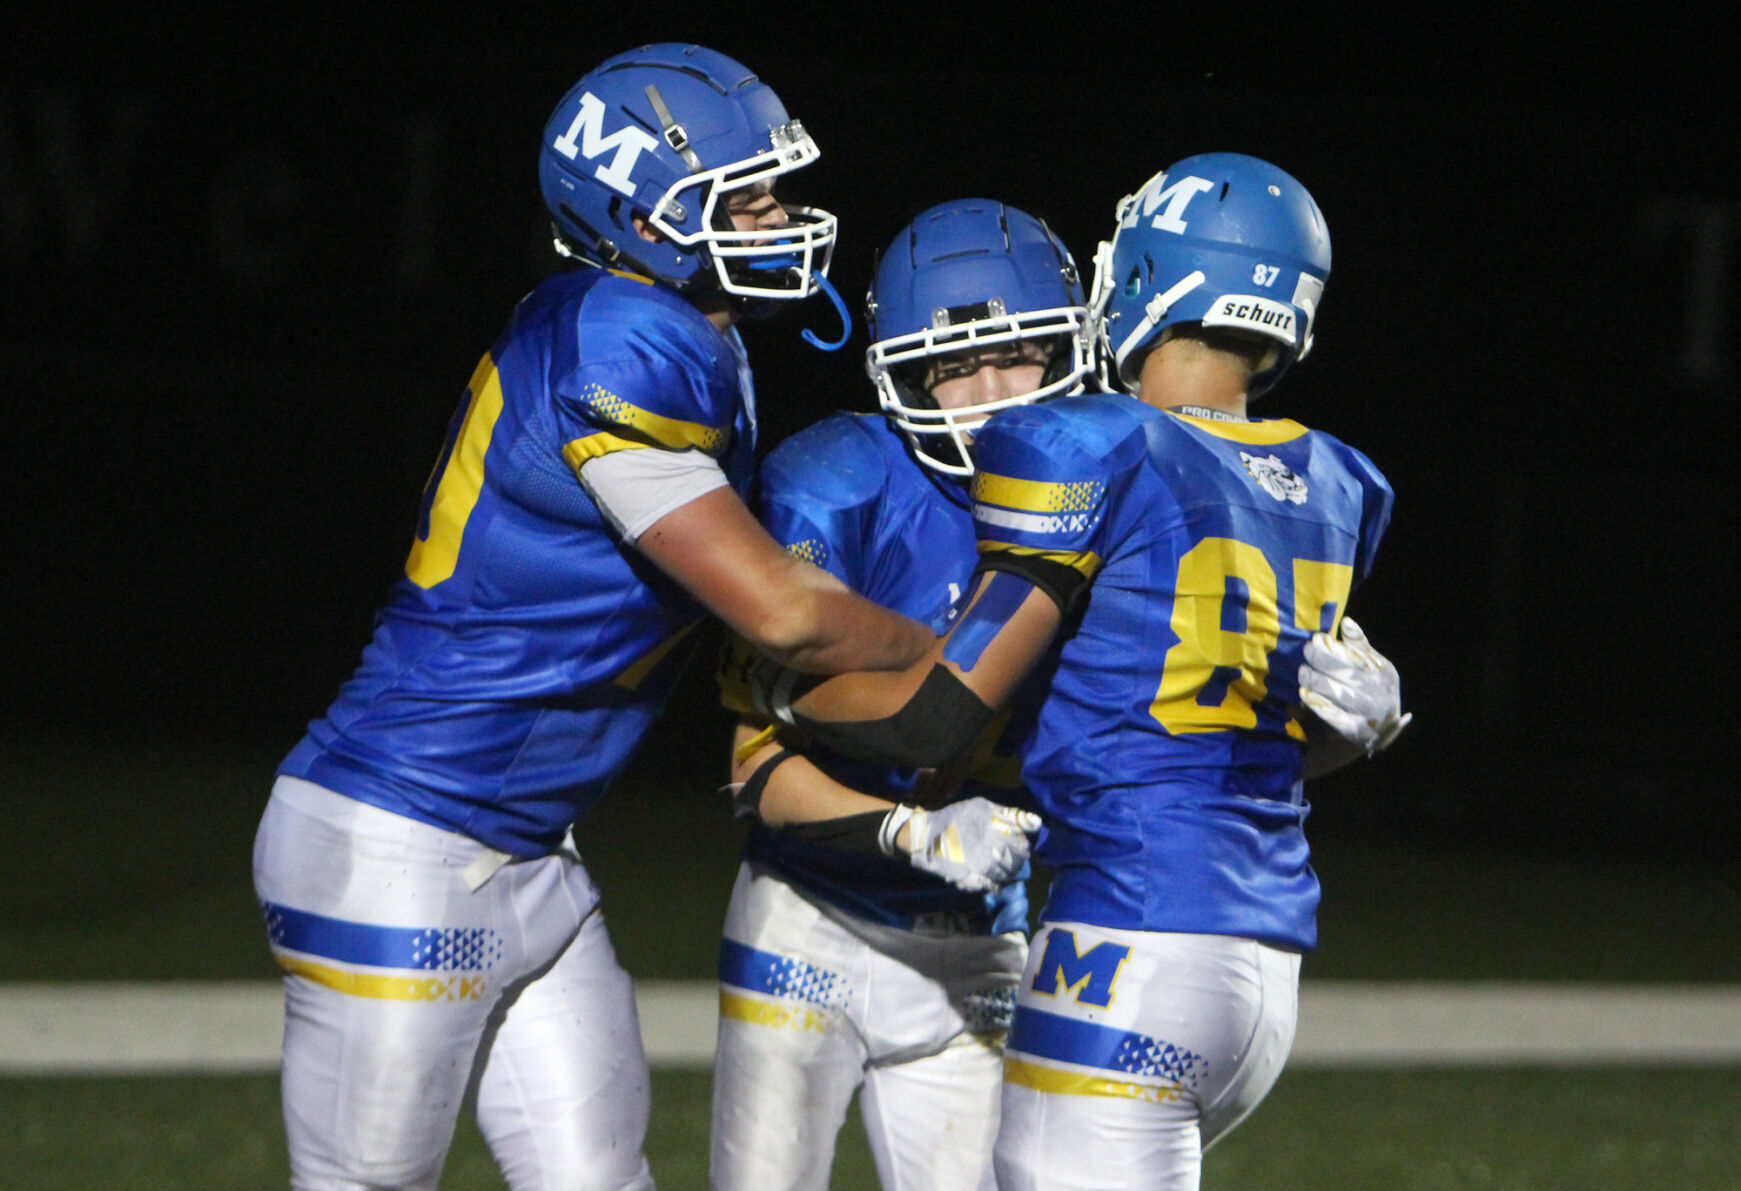 Unbeaten McDonell Prepares for Crucial High School Football Game against Bruce